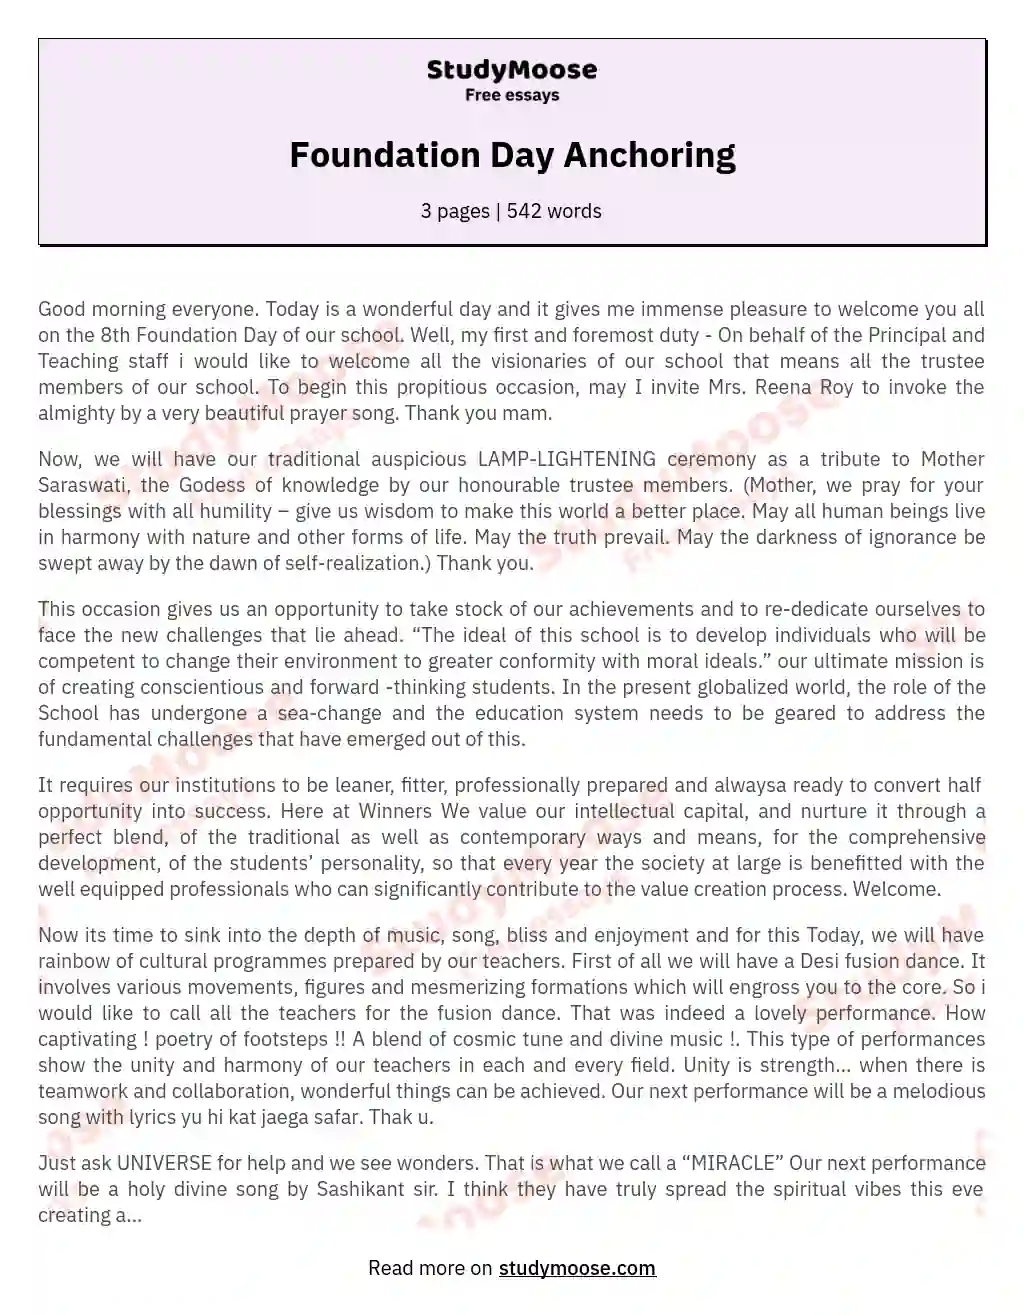 Foundation Day Anchoring essay